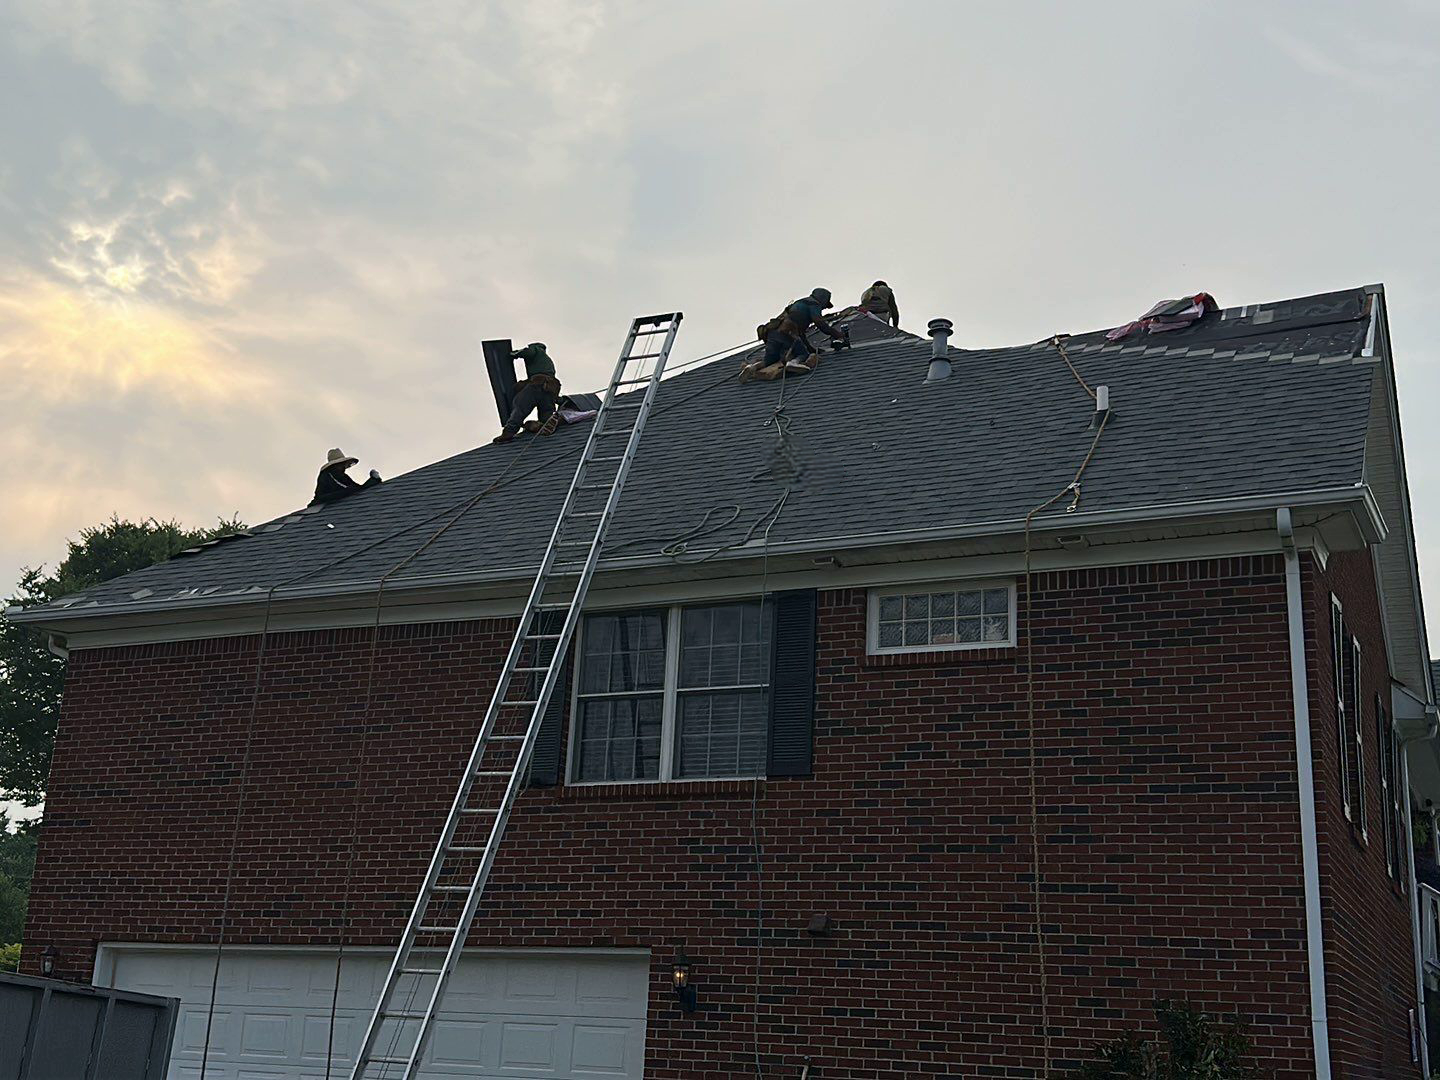 Roof being replaced